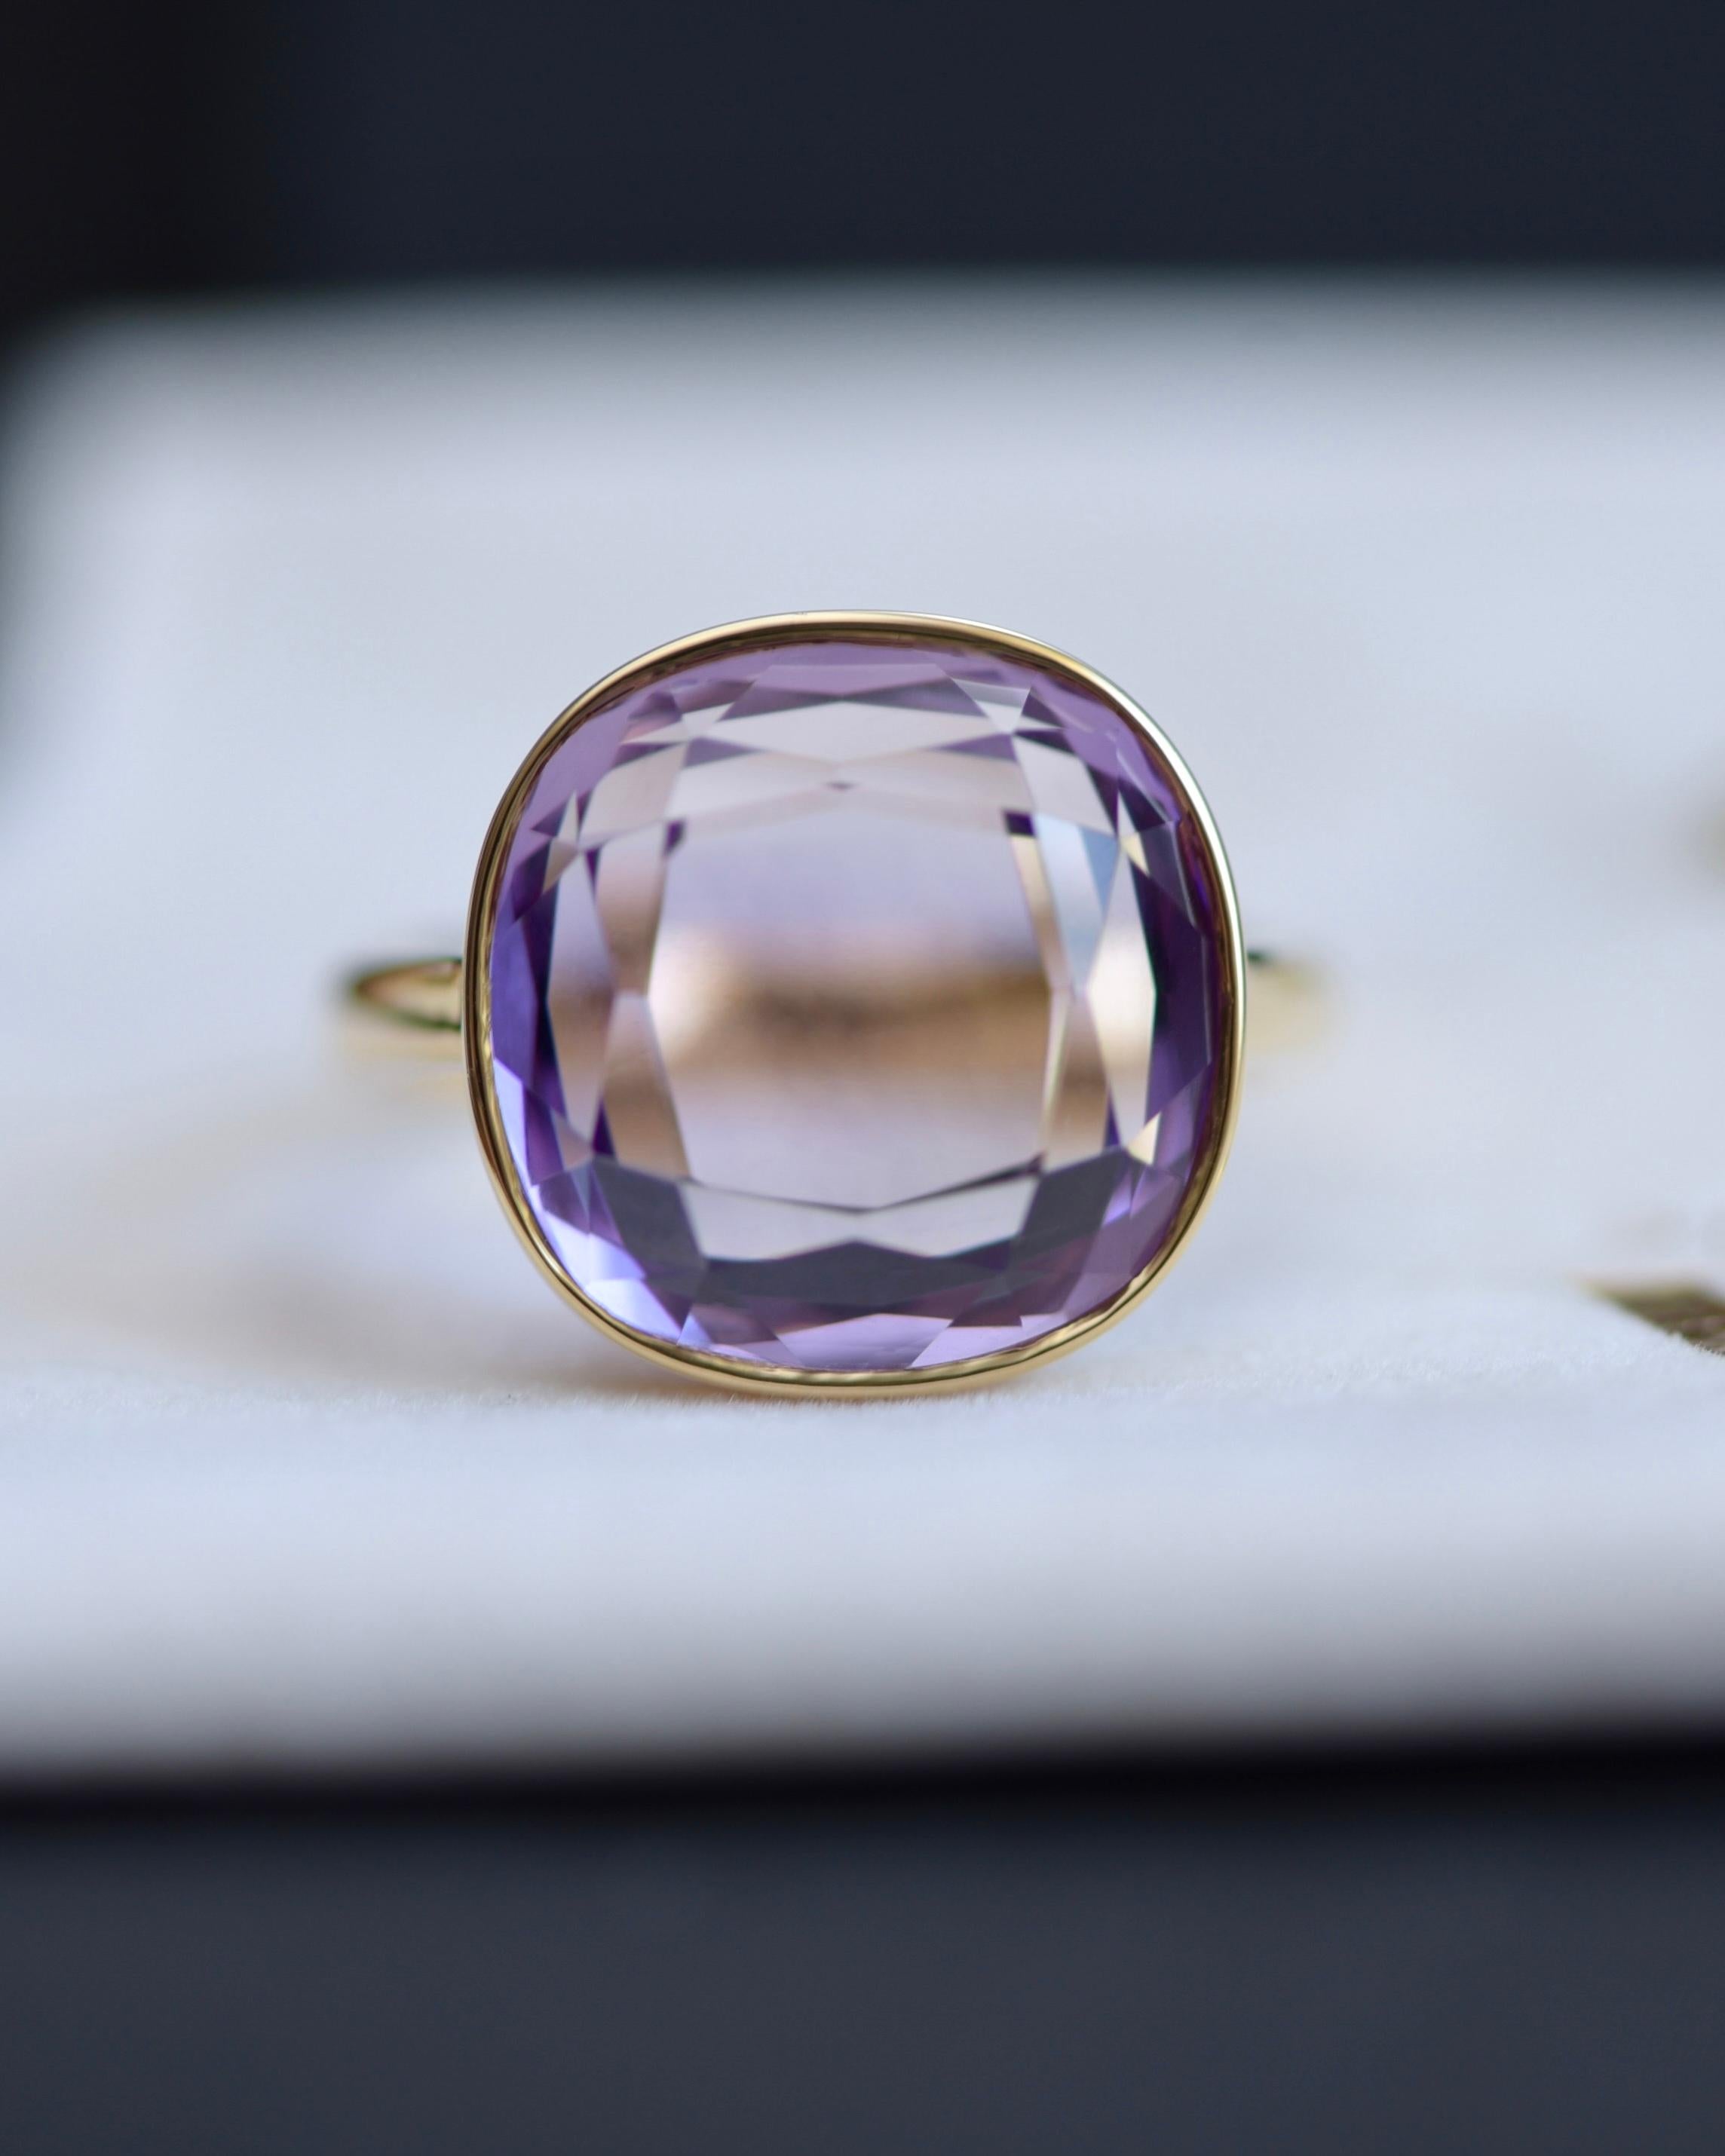 Amethyst is a very famous stone.
It is believed that it stimulates body energy and improves feelings. 
This ring is the most stylish everyday ring we have ever designed
This elegant yellow gold ring can be worn in any season or for any